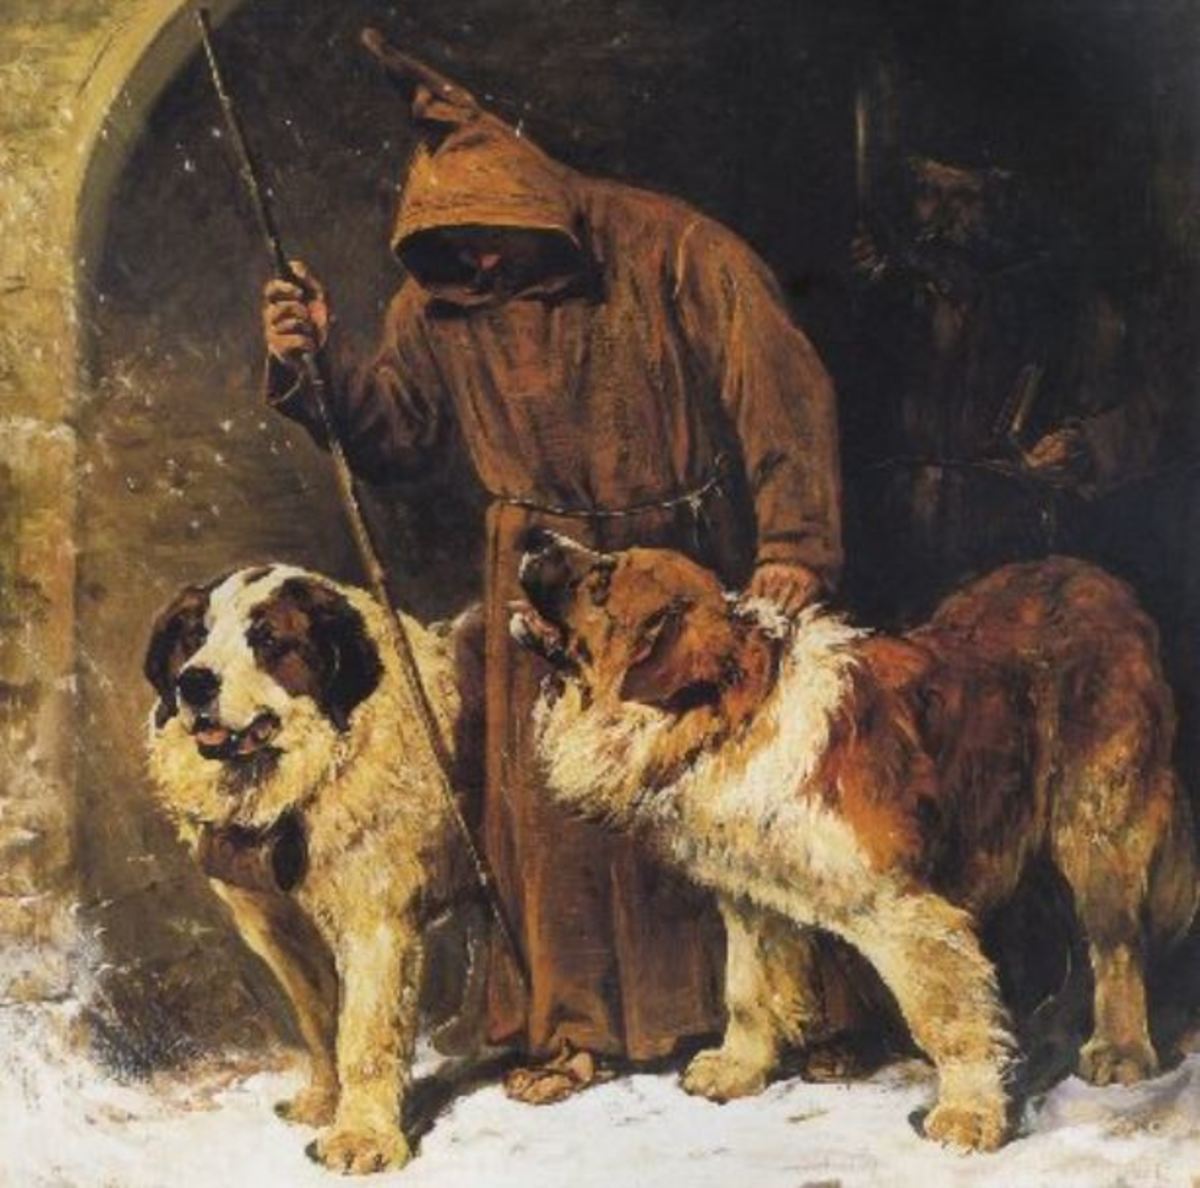 Painting by John Emms portraying St. Bernards as rescue dogs, Public Domain